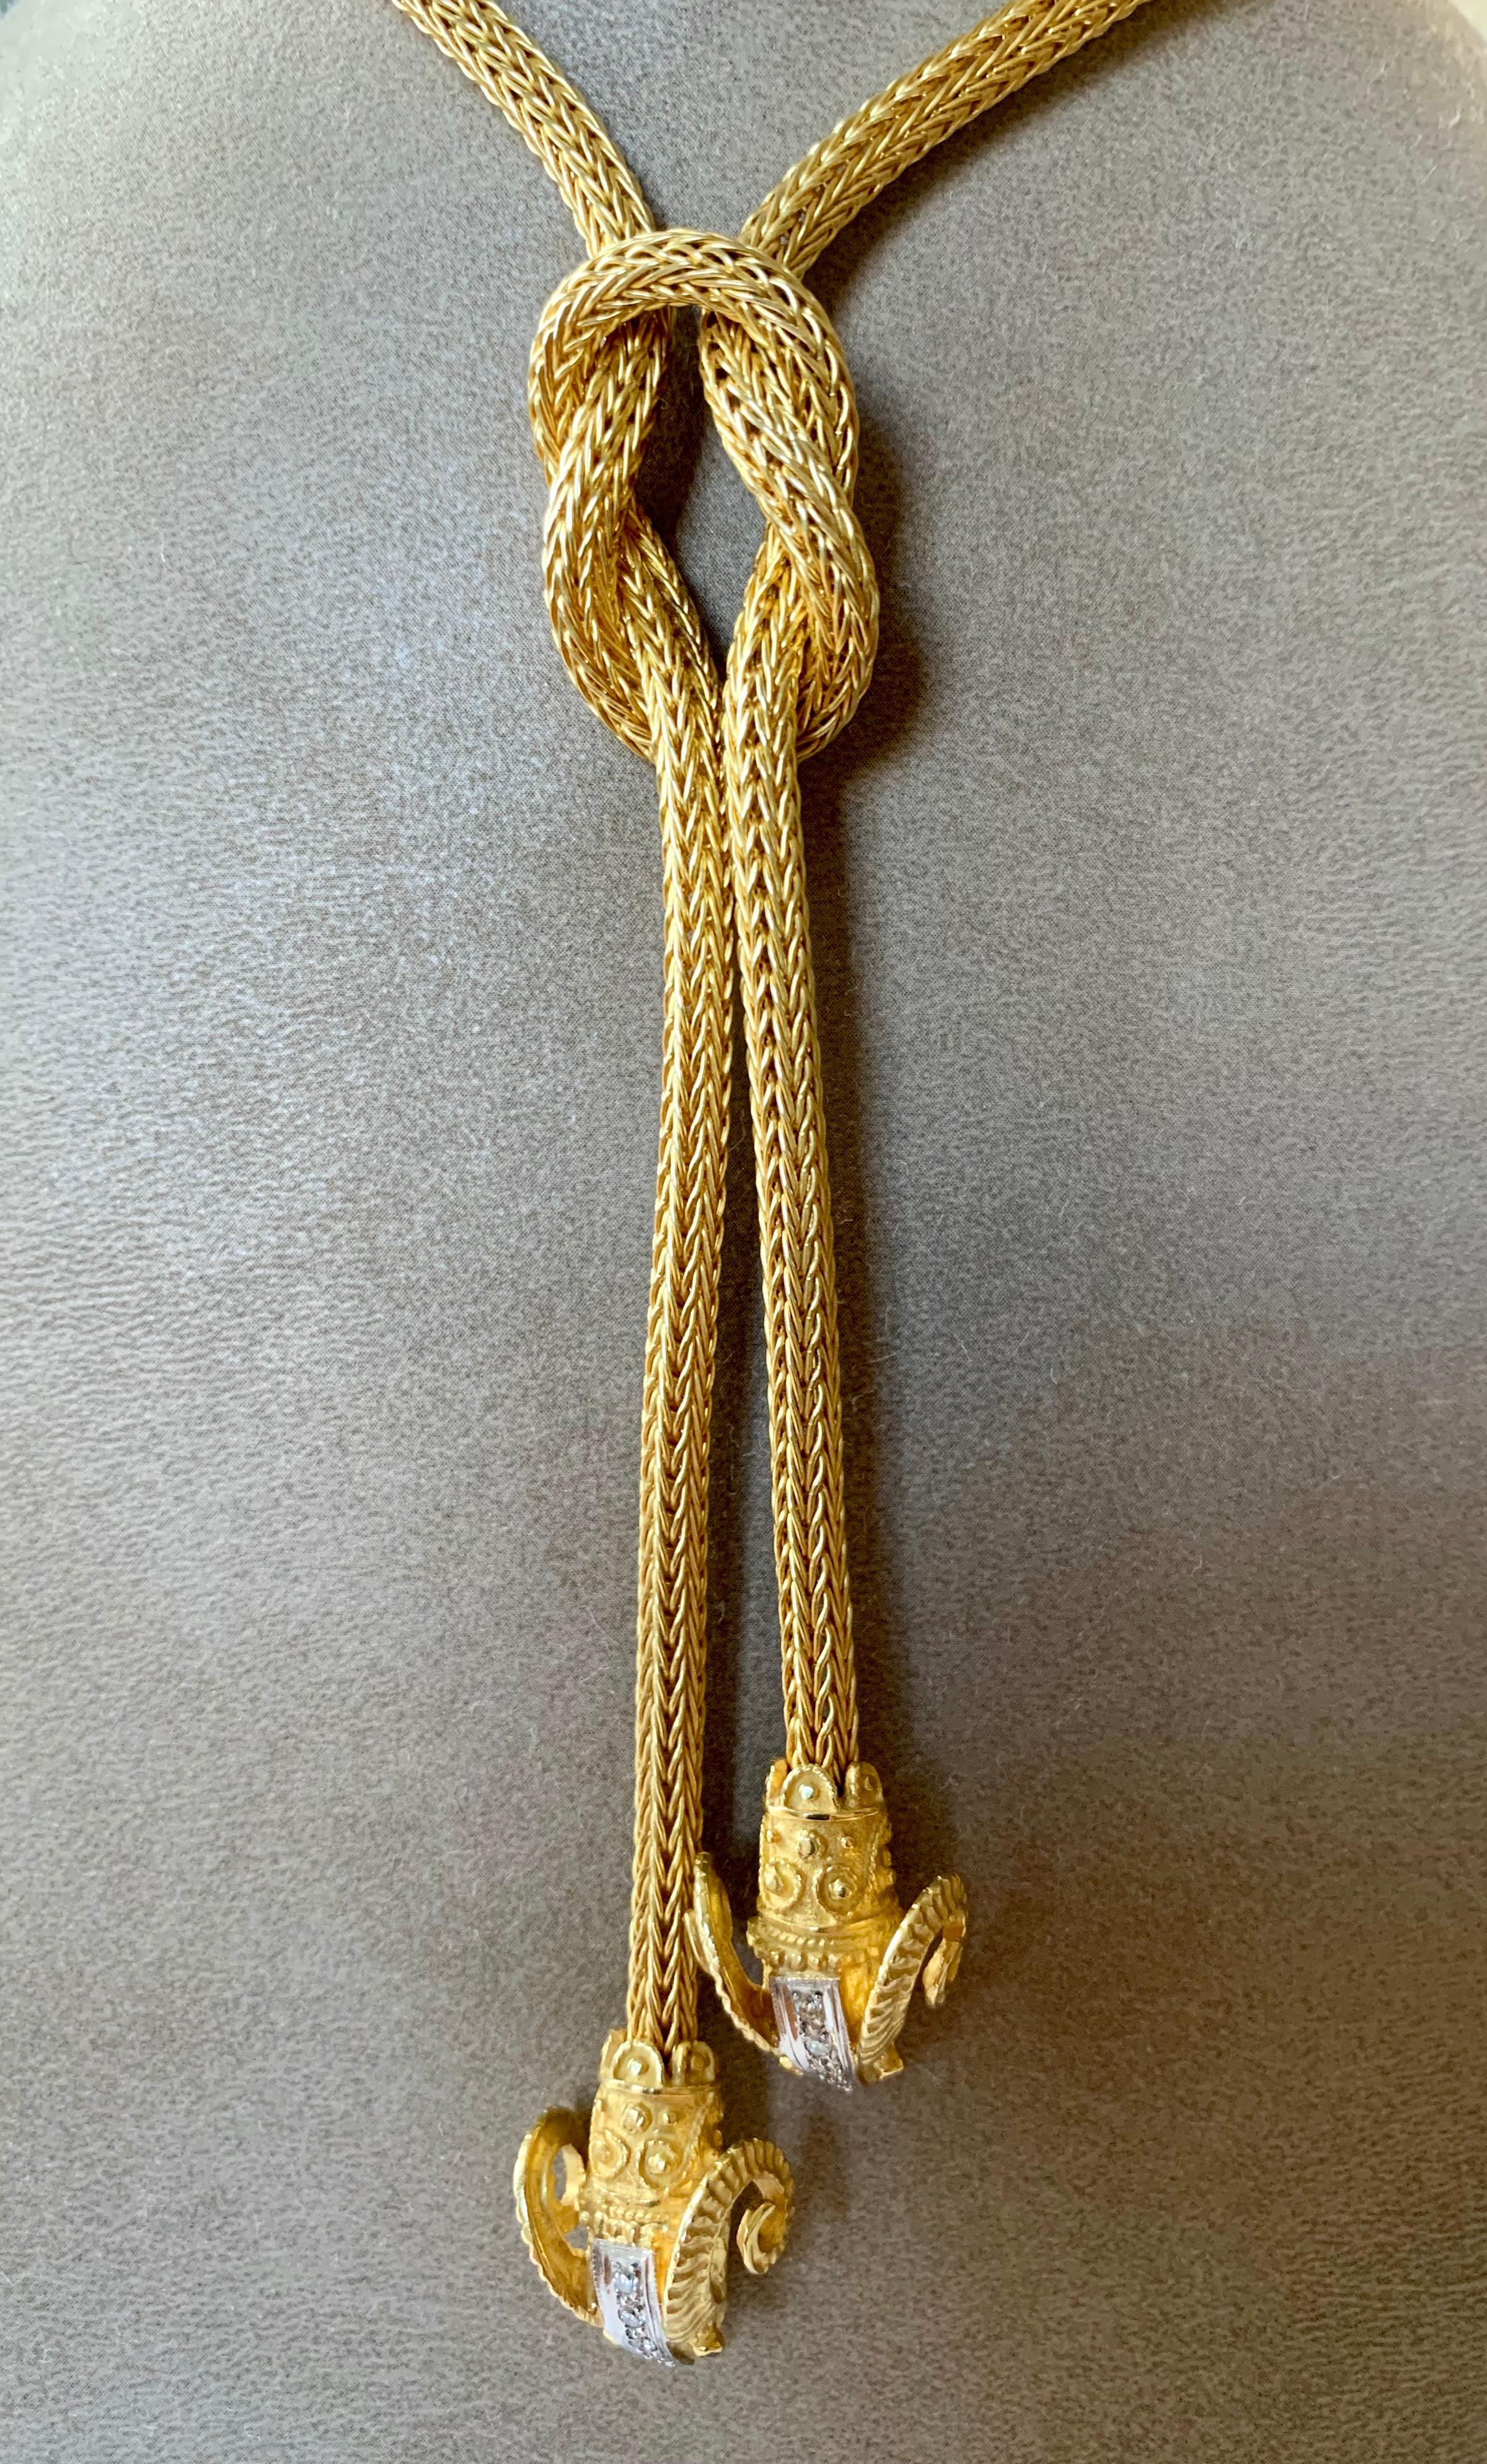 Lalaounis 18 K  yellow Gold Lavalier Style Braided Rope Necklace featuring two signature Ram's heads hanging from an oversize knot. The necklace measures approximately 49 cm length with another 13 cm from the top of the knot to the bottom of the